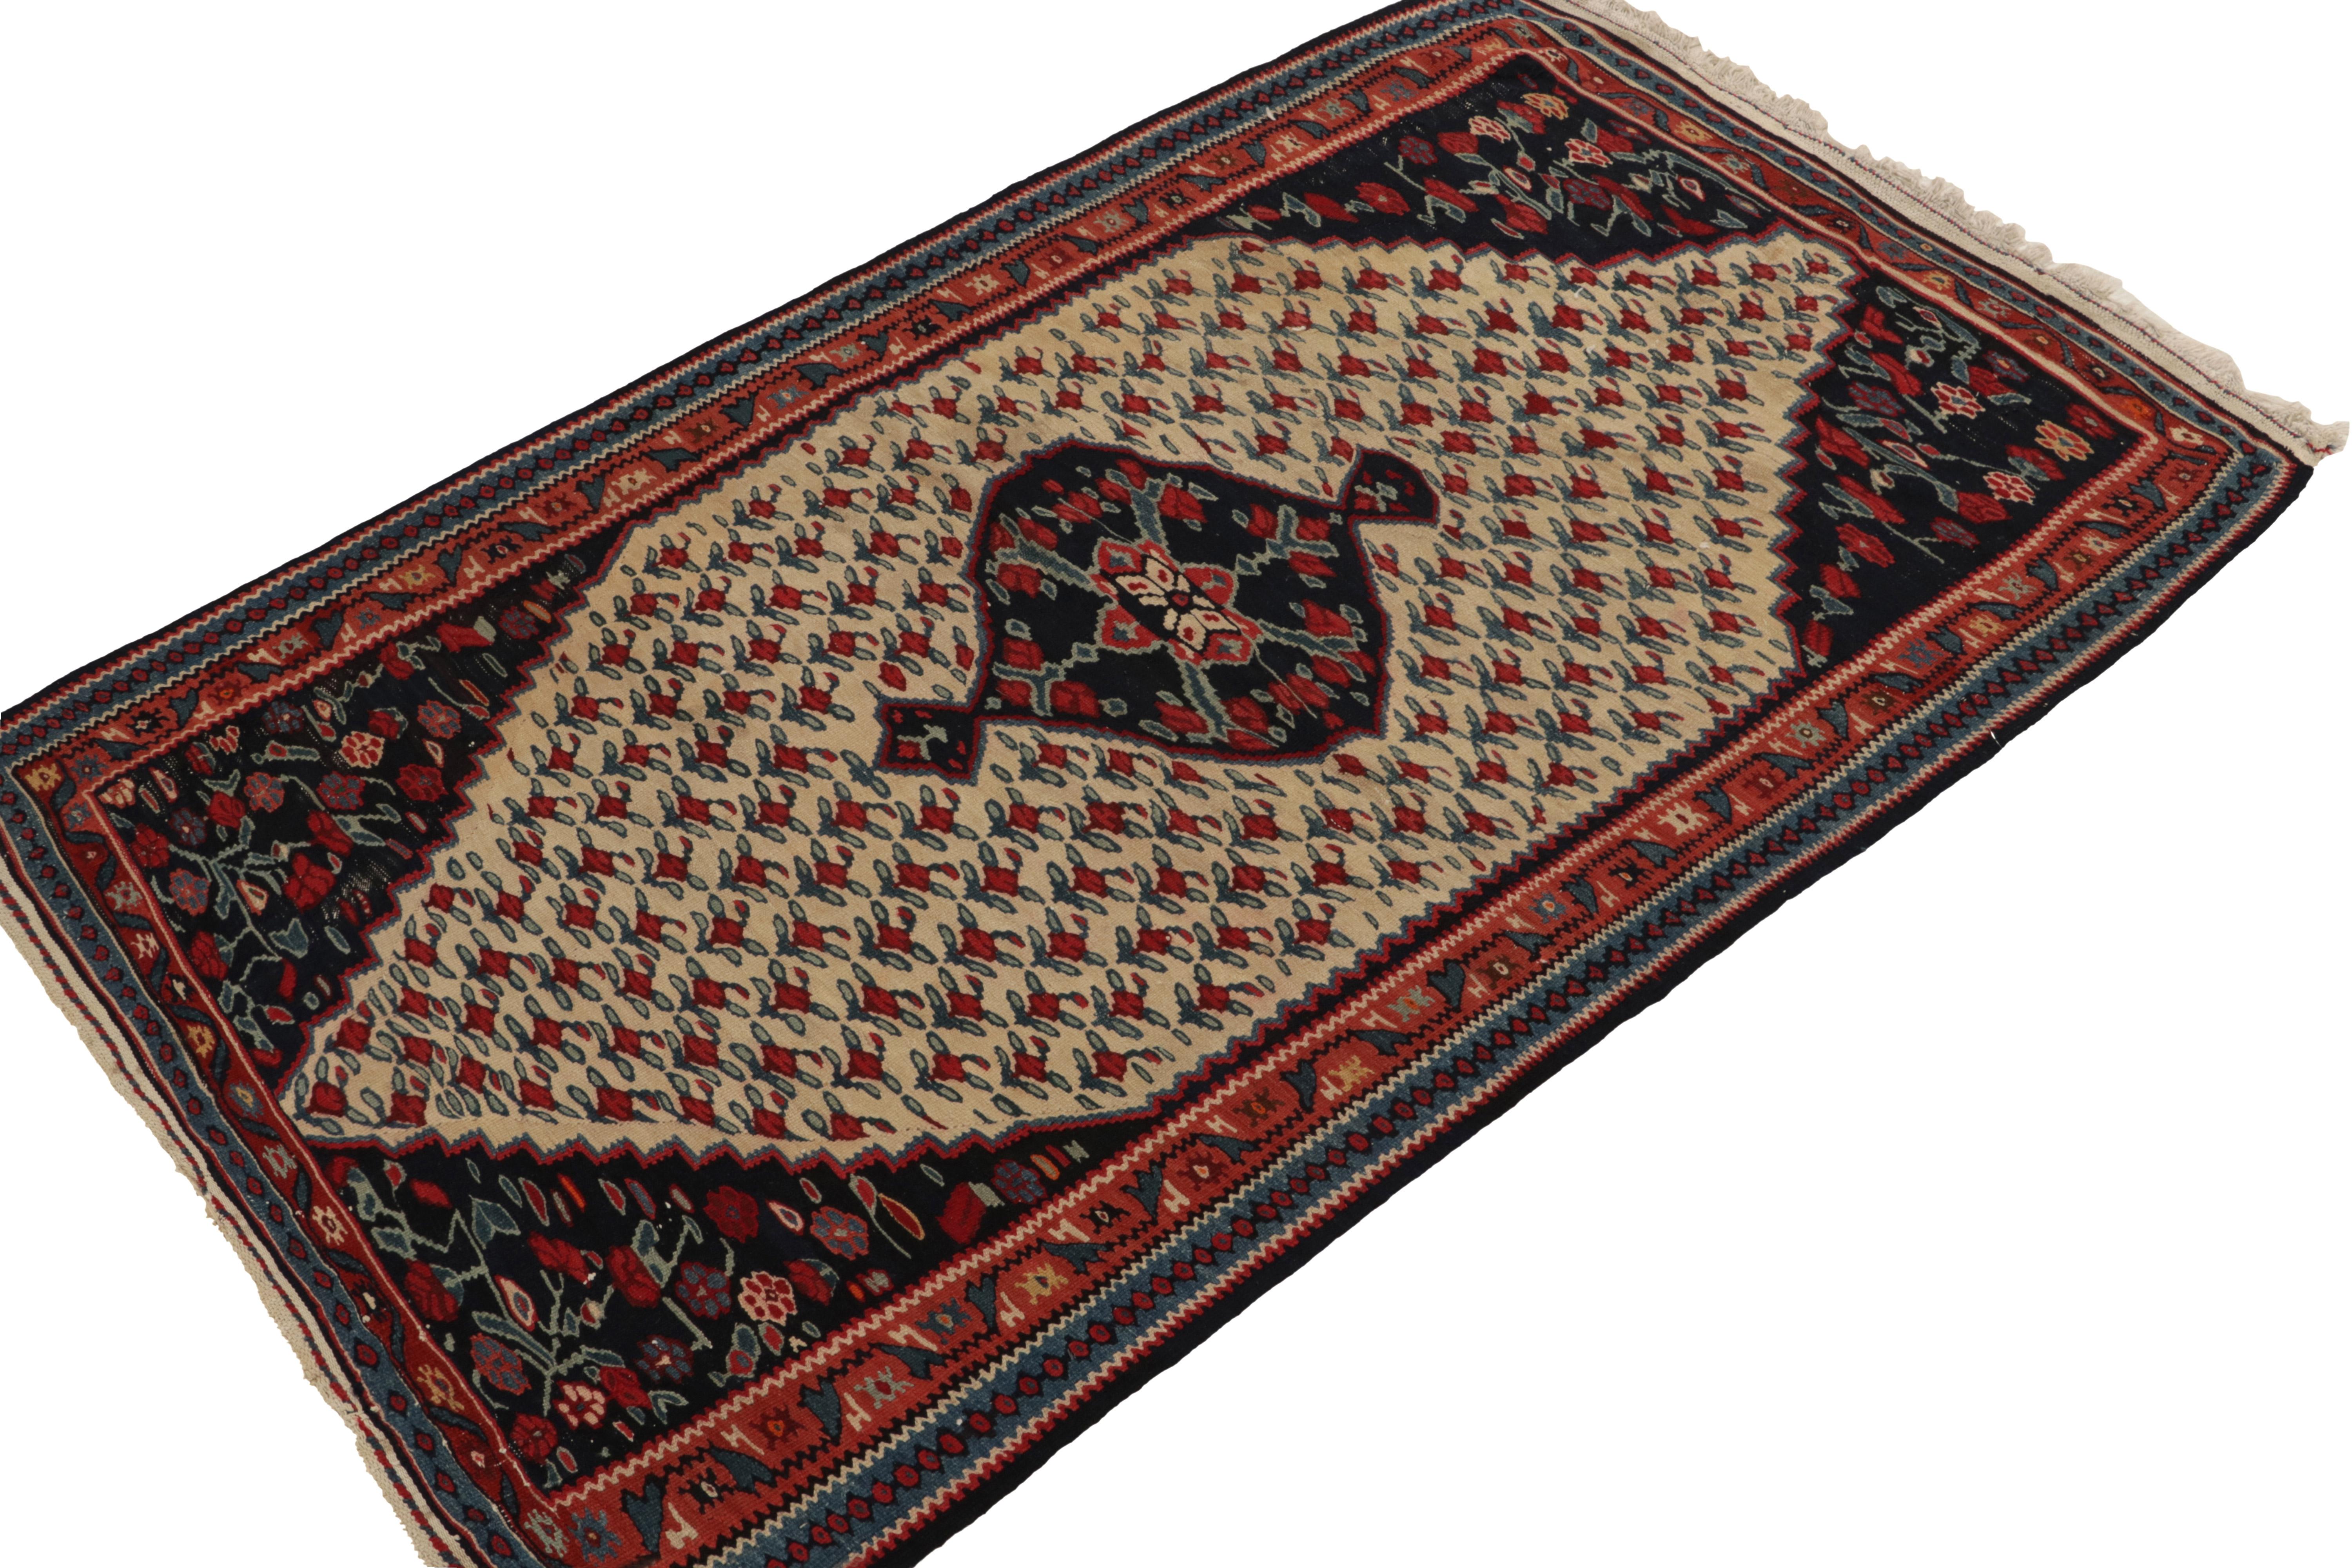 Handwoven in wool, a 3x5 antique Senneh Kilim rug originating circa 1930-1940. This beautiful piece showcases a brilliant floral design distinct from other tribal provenances in persian weaving. Boasting rich tones of red and blue on beige, an